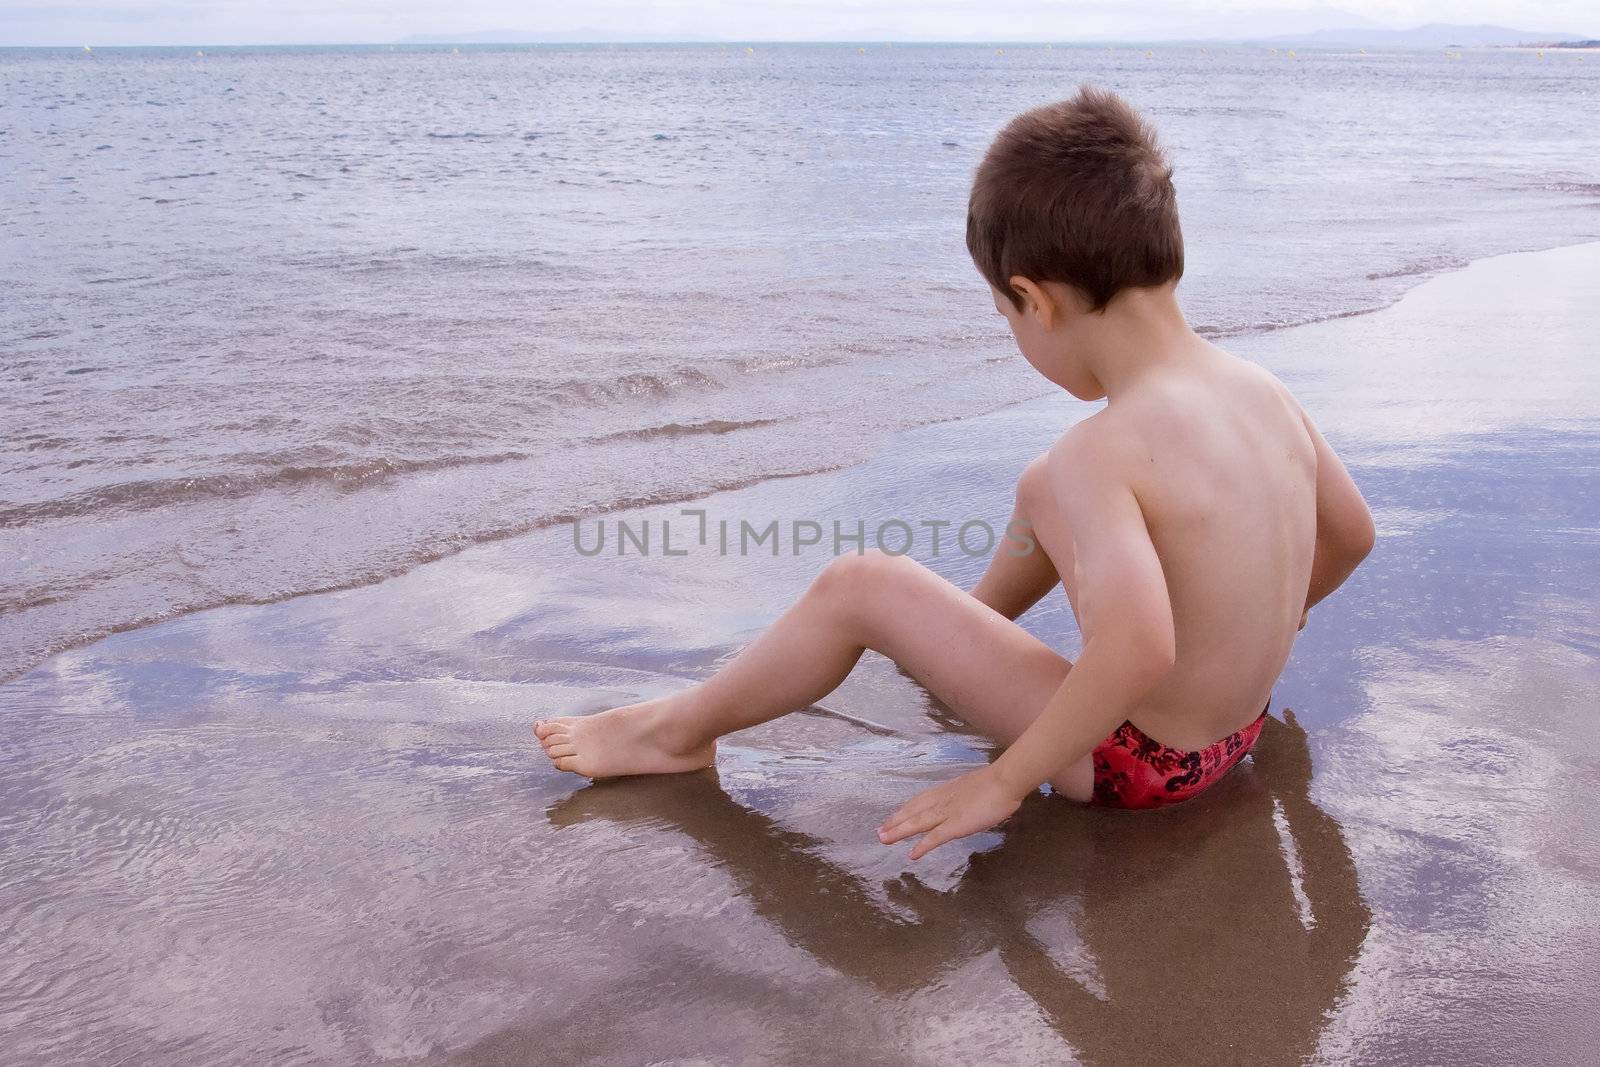 Young child alone on the beach by chrisroll